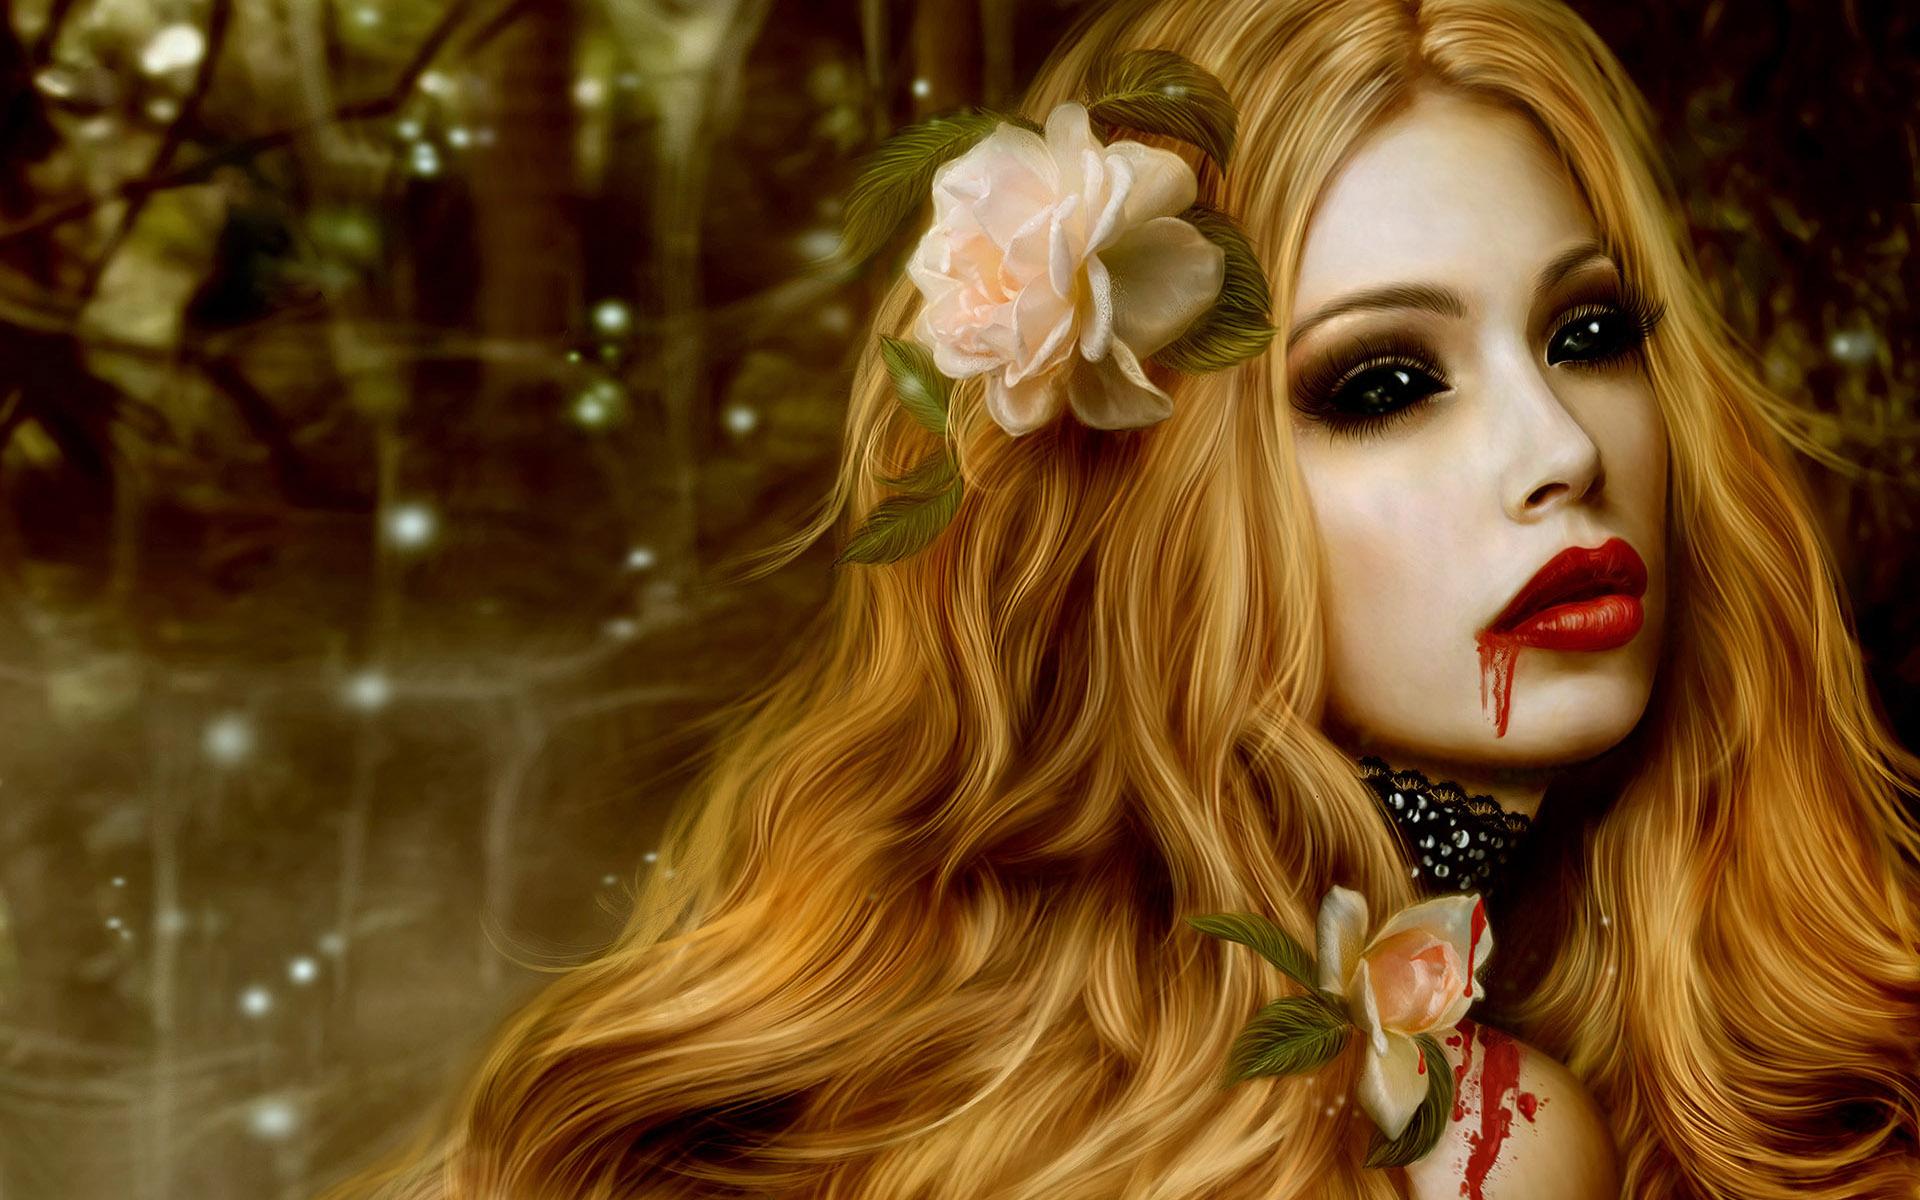 Blonde vampire with black eyes holding a rose, against a fantasy backdrop.